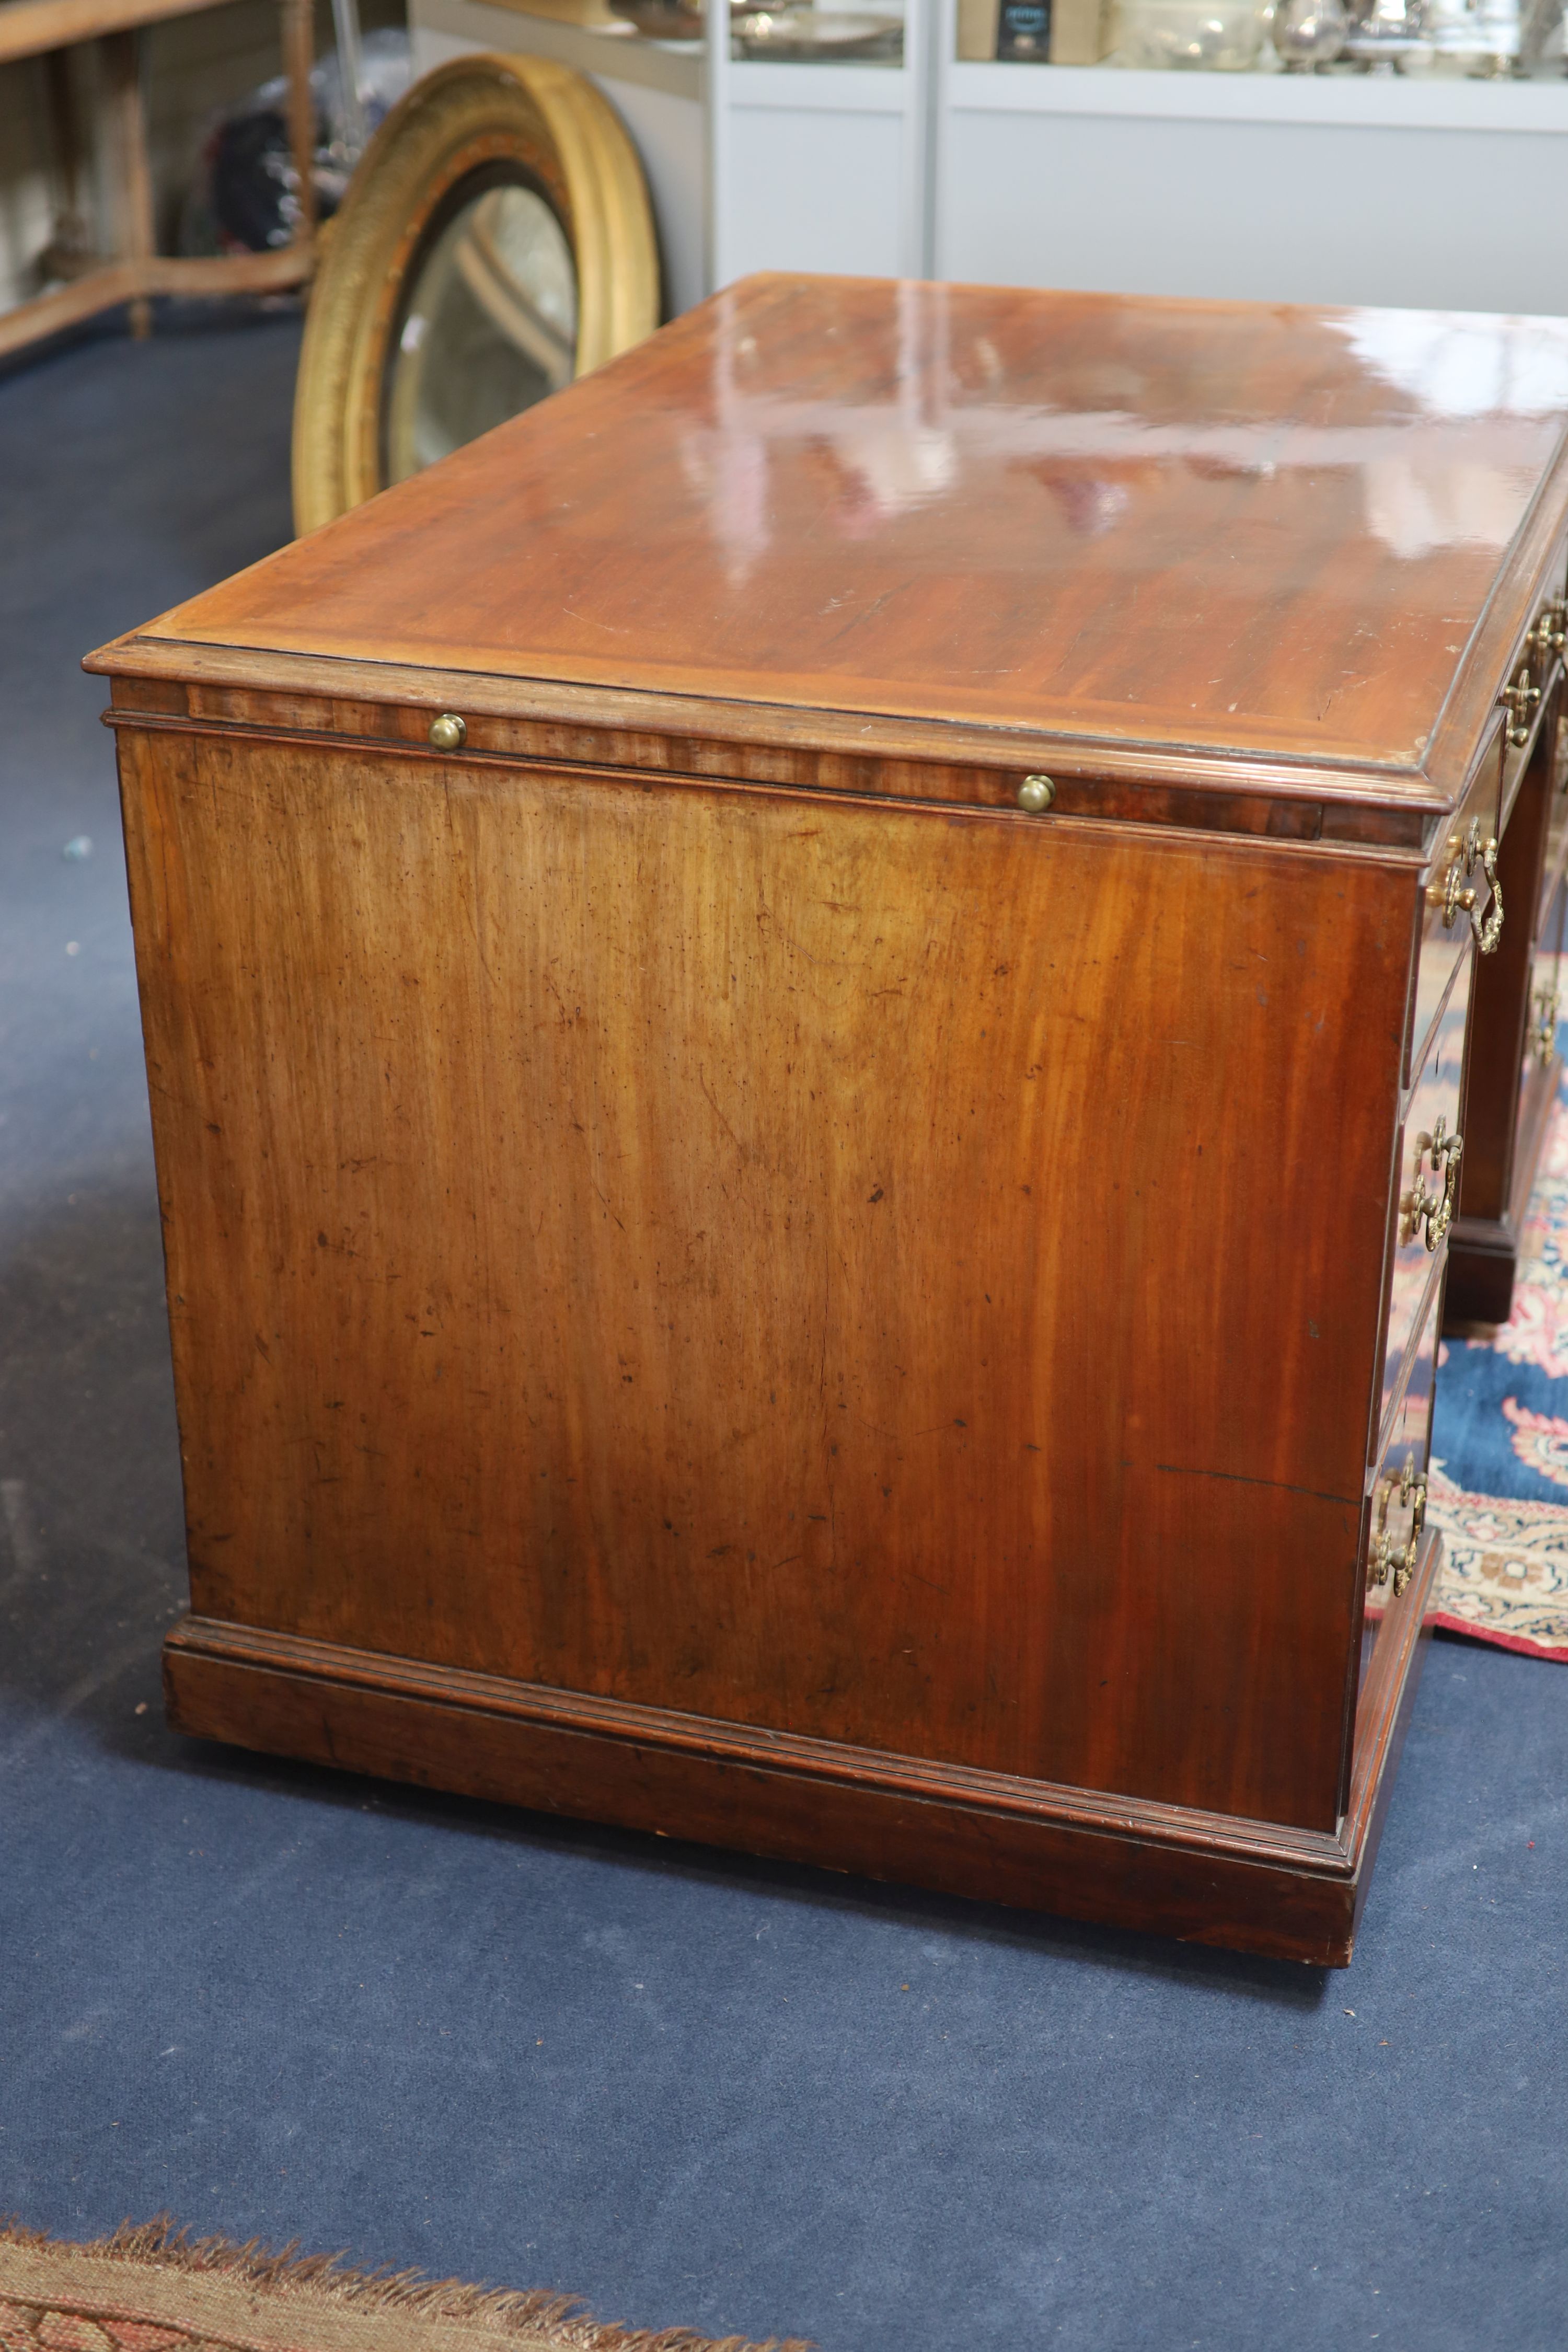 A George IV mahogany kneehole desk by William Williamson & Son of Guildford, second quarter 19th century width 125cm depth 79cm height